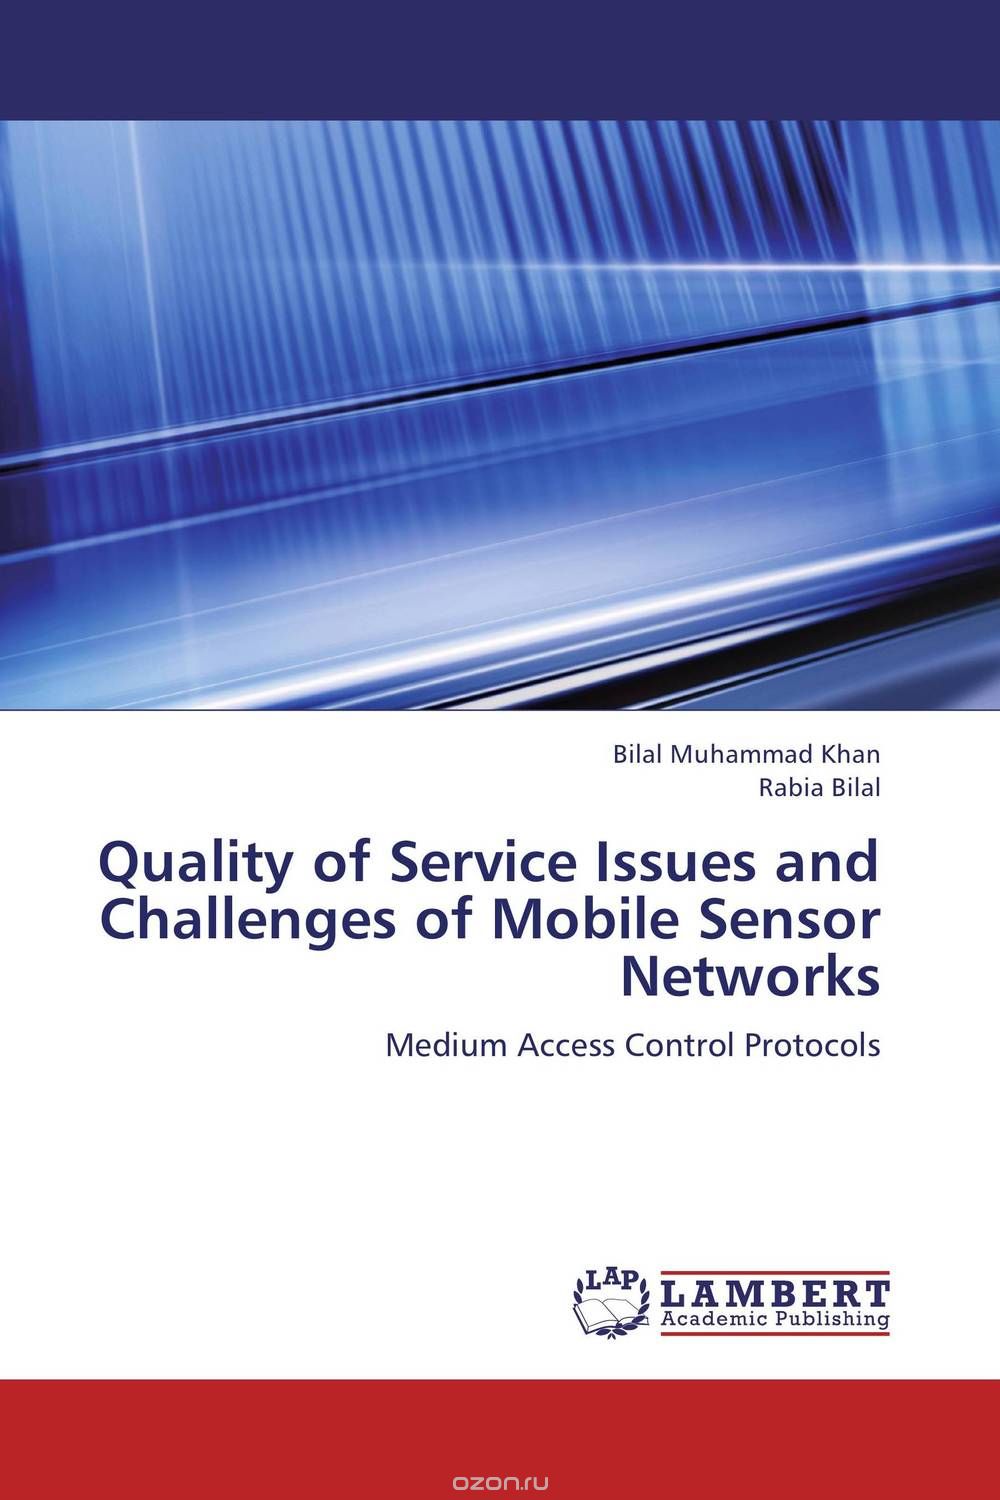 Quality of Service Issues and Challenges of Mobile Sensor Networks